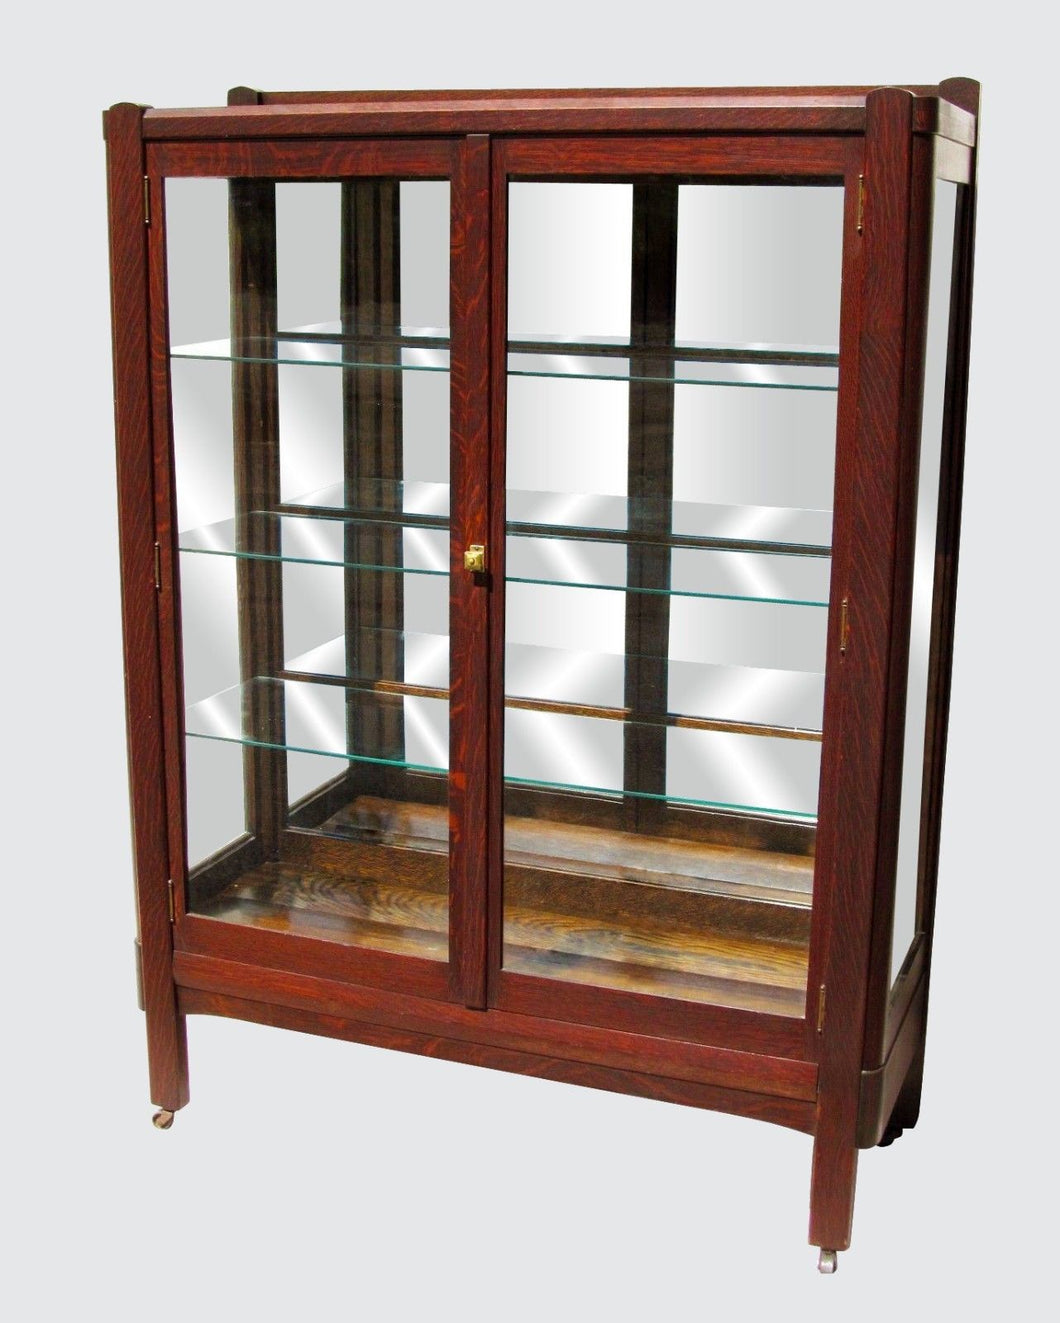 FABULOUS OAK ARTS & CRAFTS BOOKCASE-CHINA CABINET BY THE LIFETIME FURNITURE CO